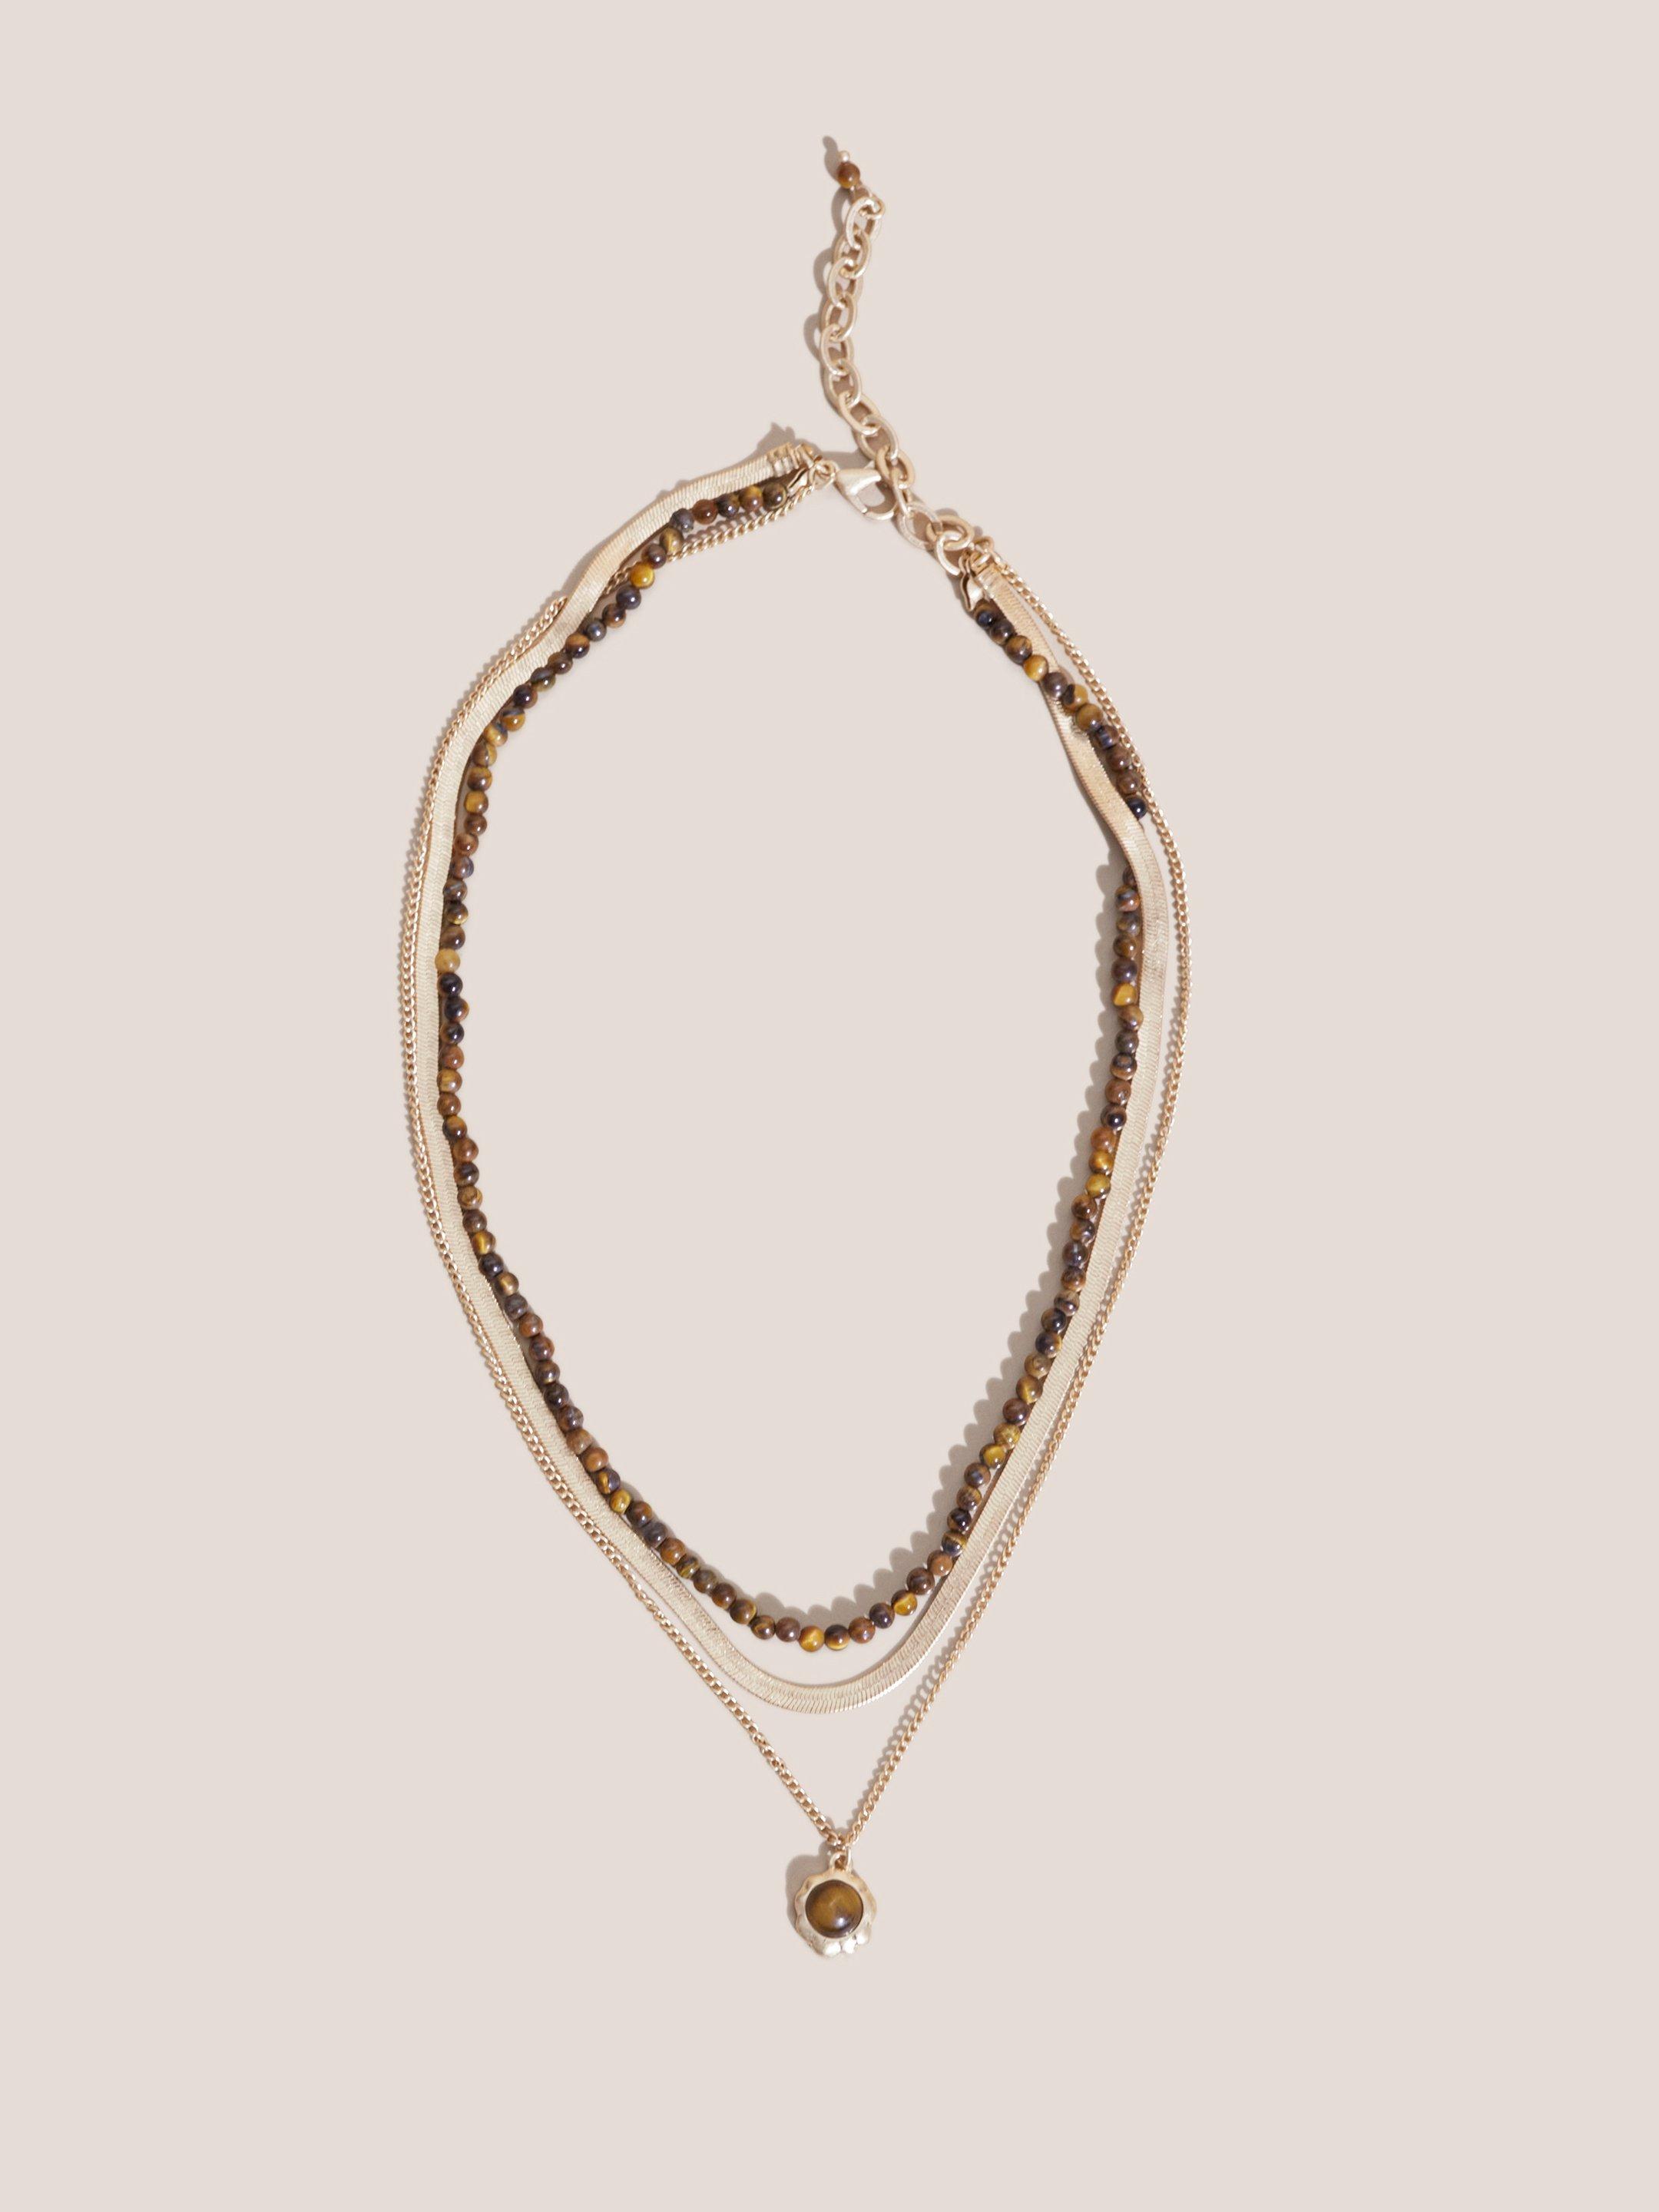 MULTI LAYER PENDANT NECKLACE in GLD TN MET - FLAT FRONT